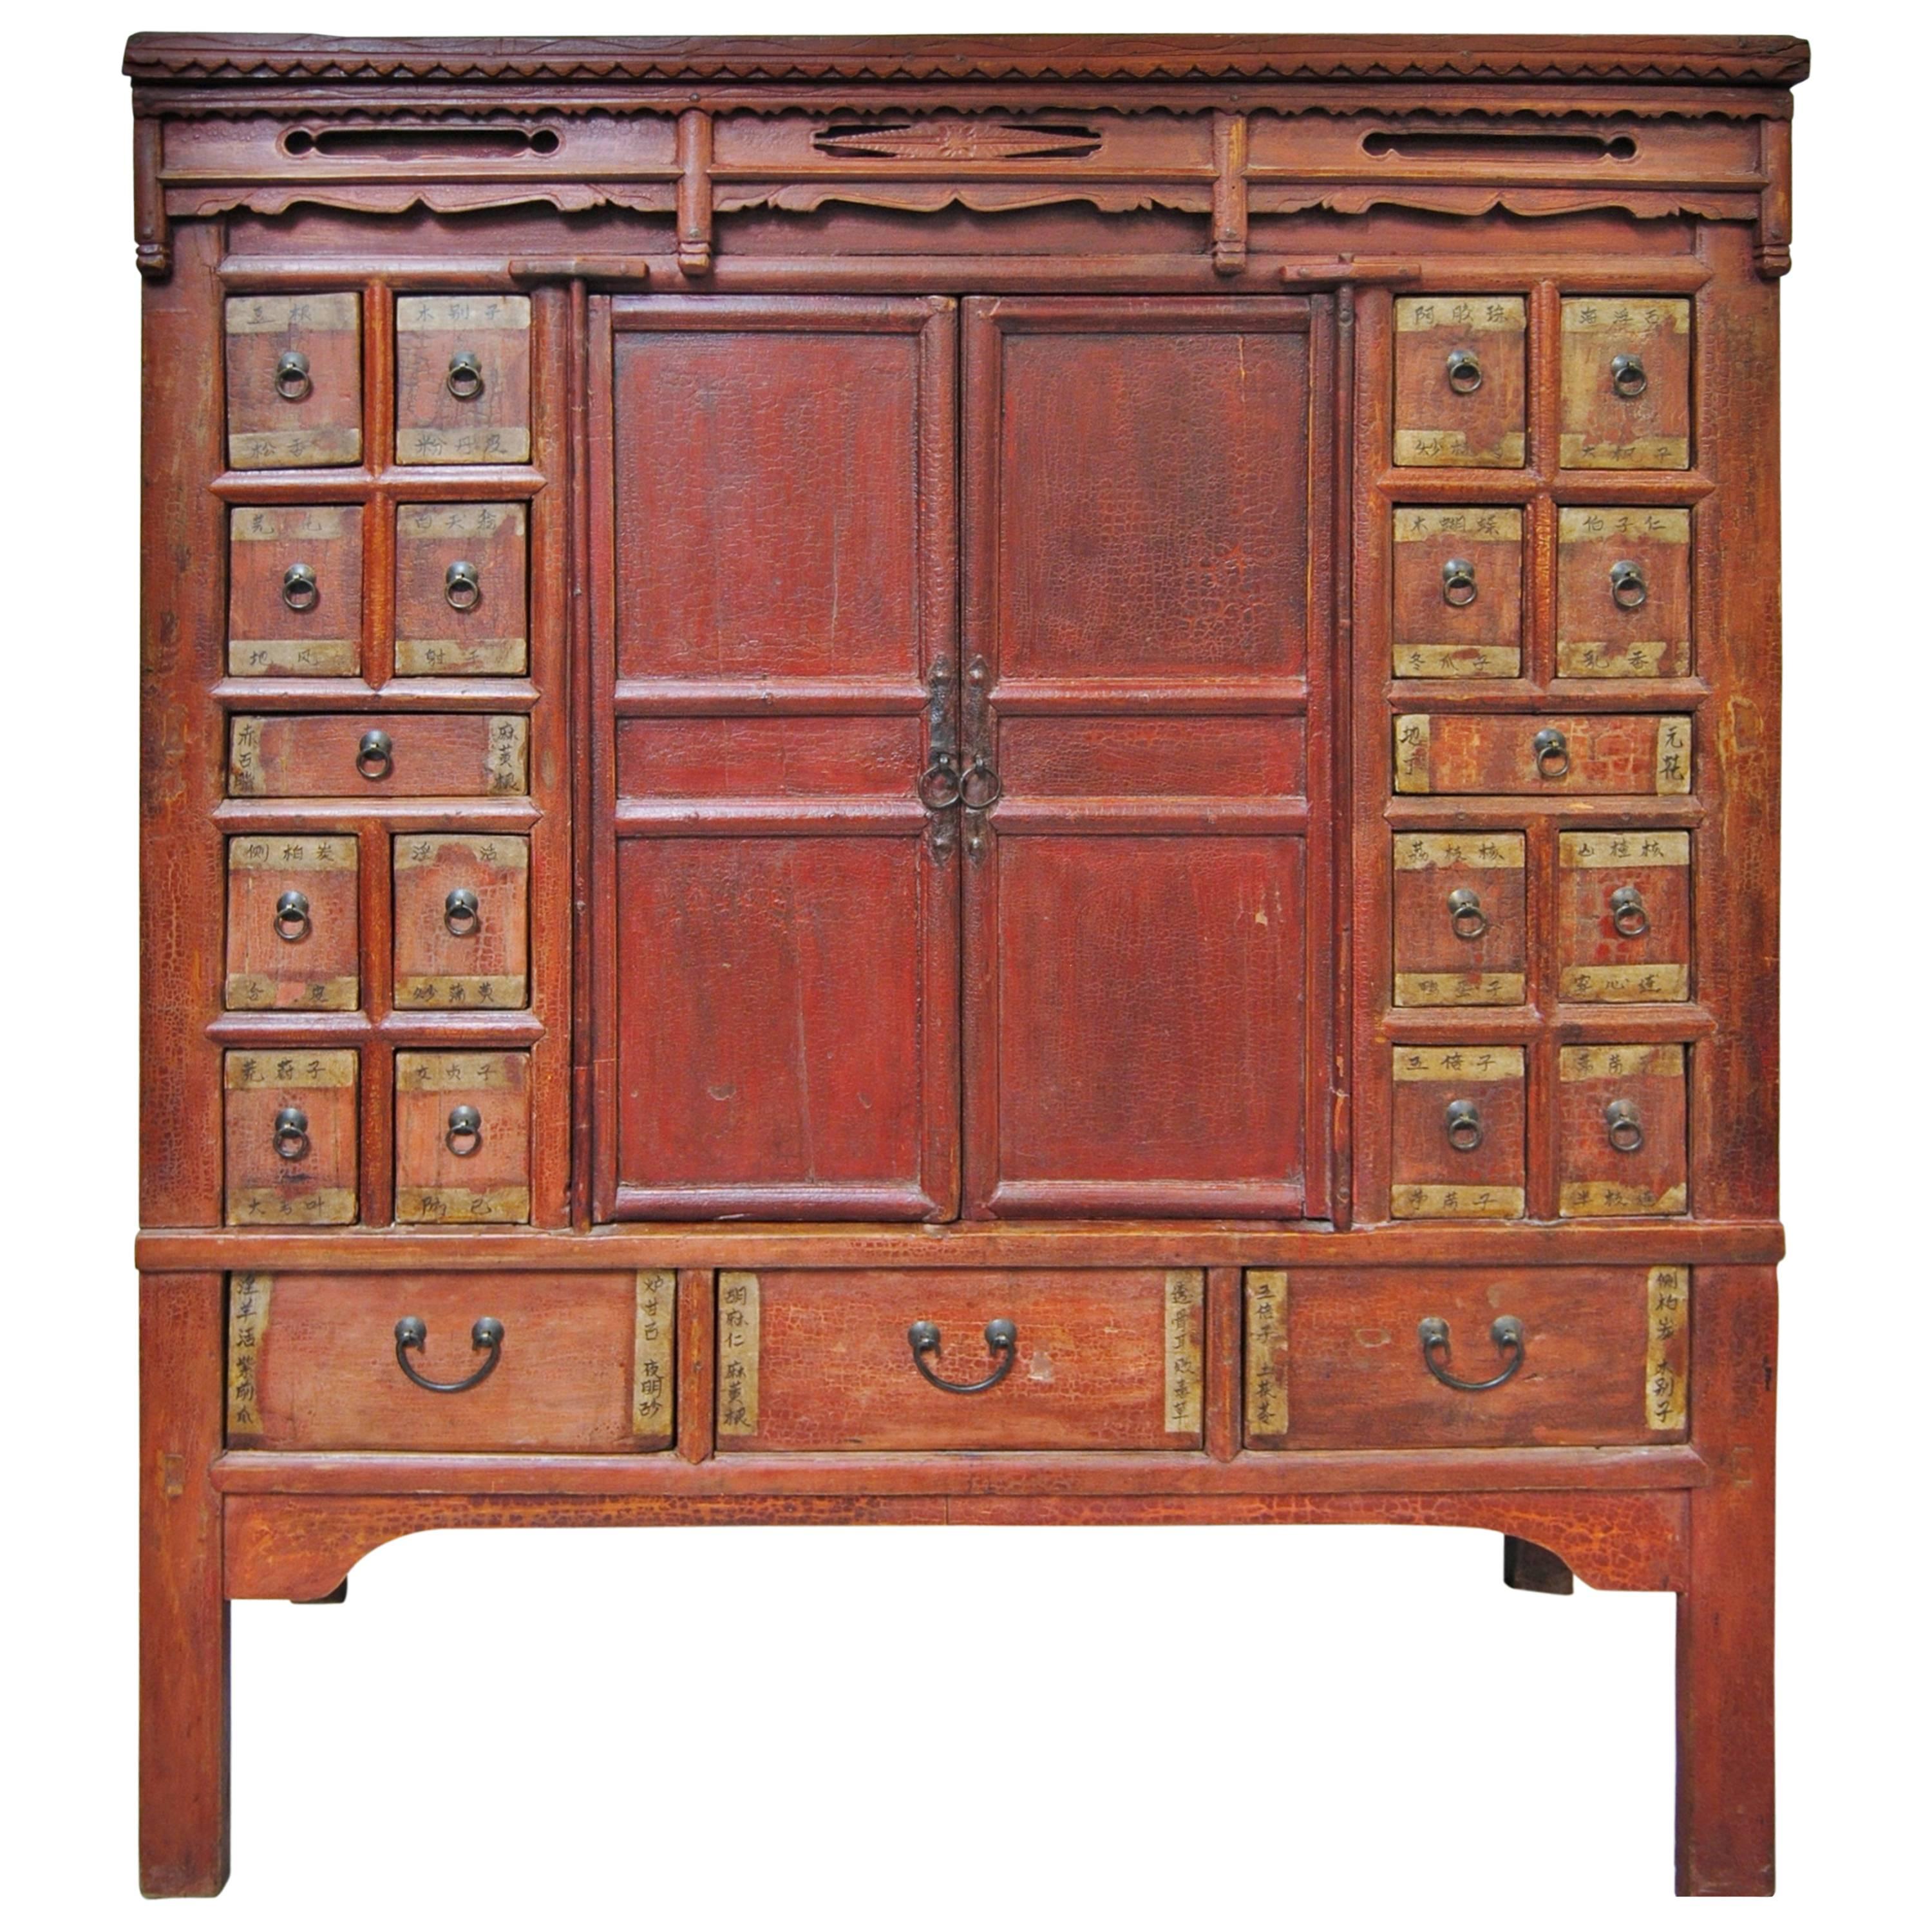 Antique Chinese Apothecary Armoire, Shanxi Province, Early 19th Century